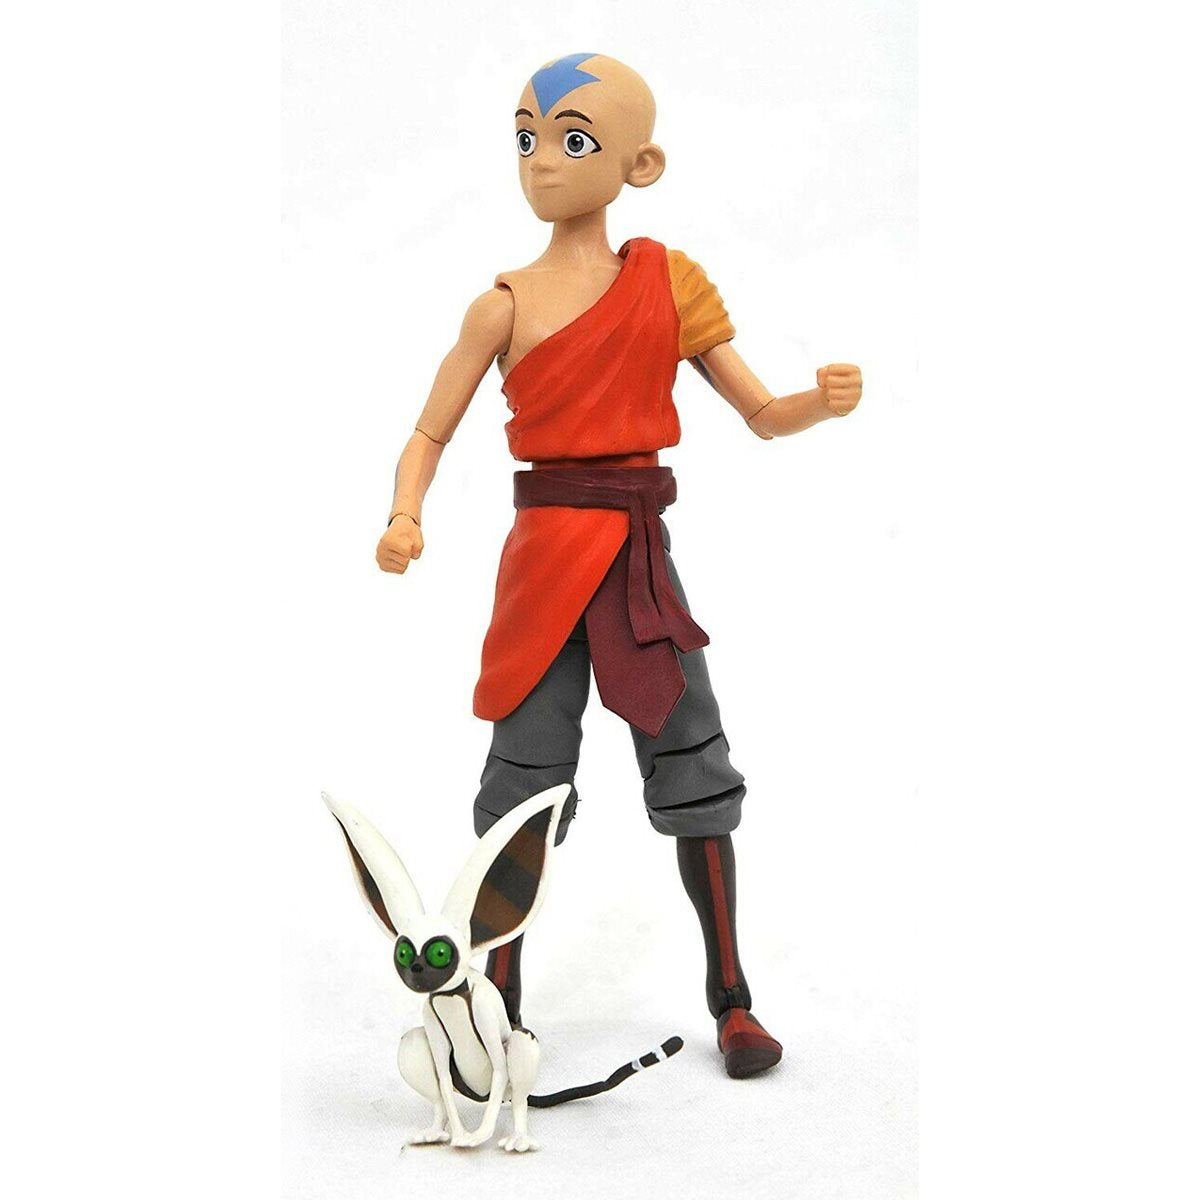 Aang (Avatar: The Last Airbender) - Diamond Select Deluxe 7" Action Figure